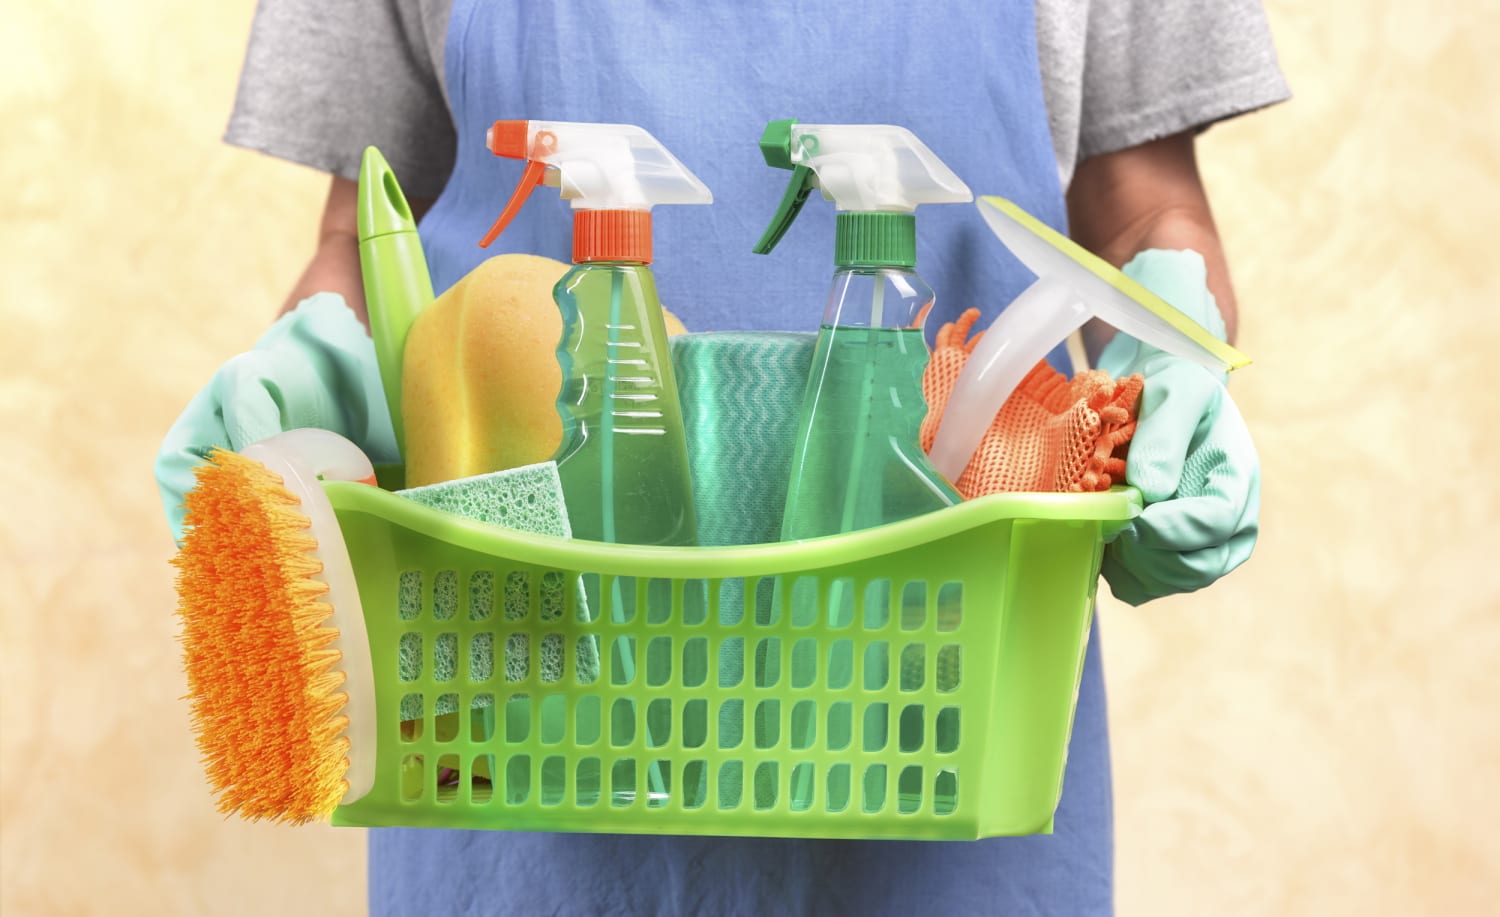 Cleaning shortcuts that are worth the time and money, according to an expert